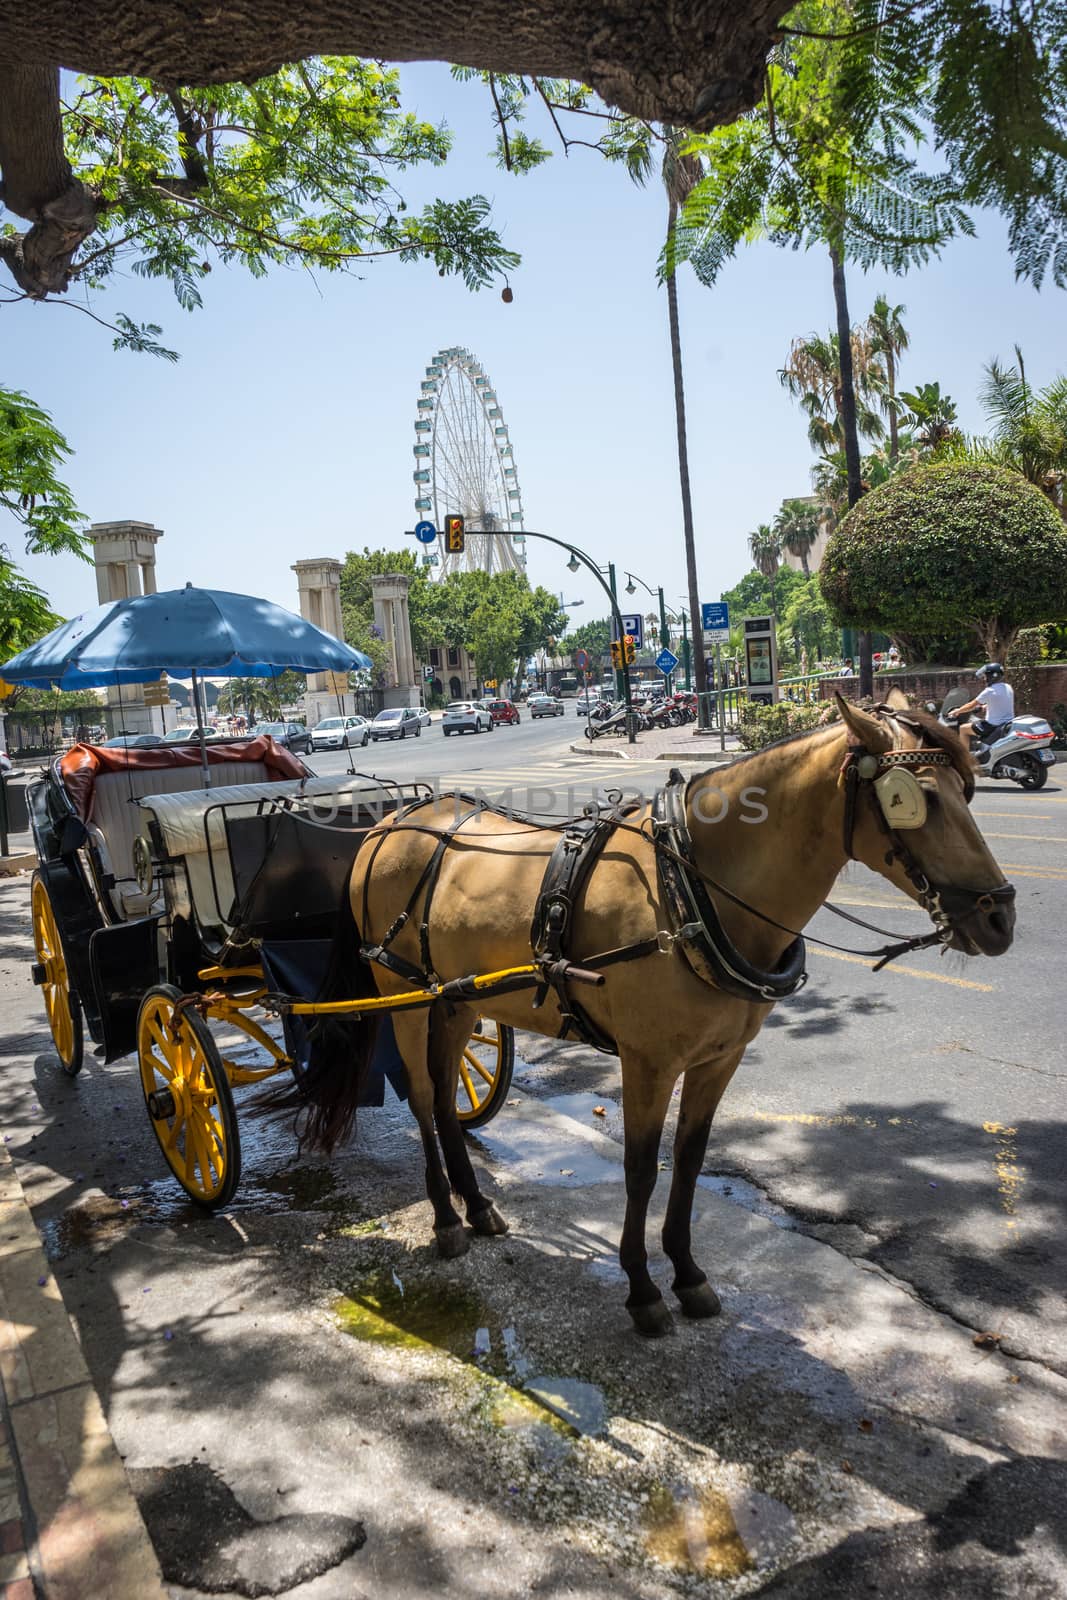 A horse drawn carriage in front of a giant wheel at Malaga, Spain, Europe on a bright summer day